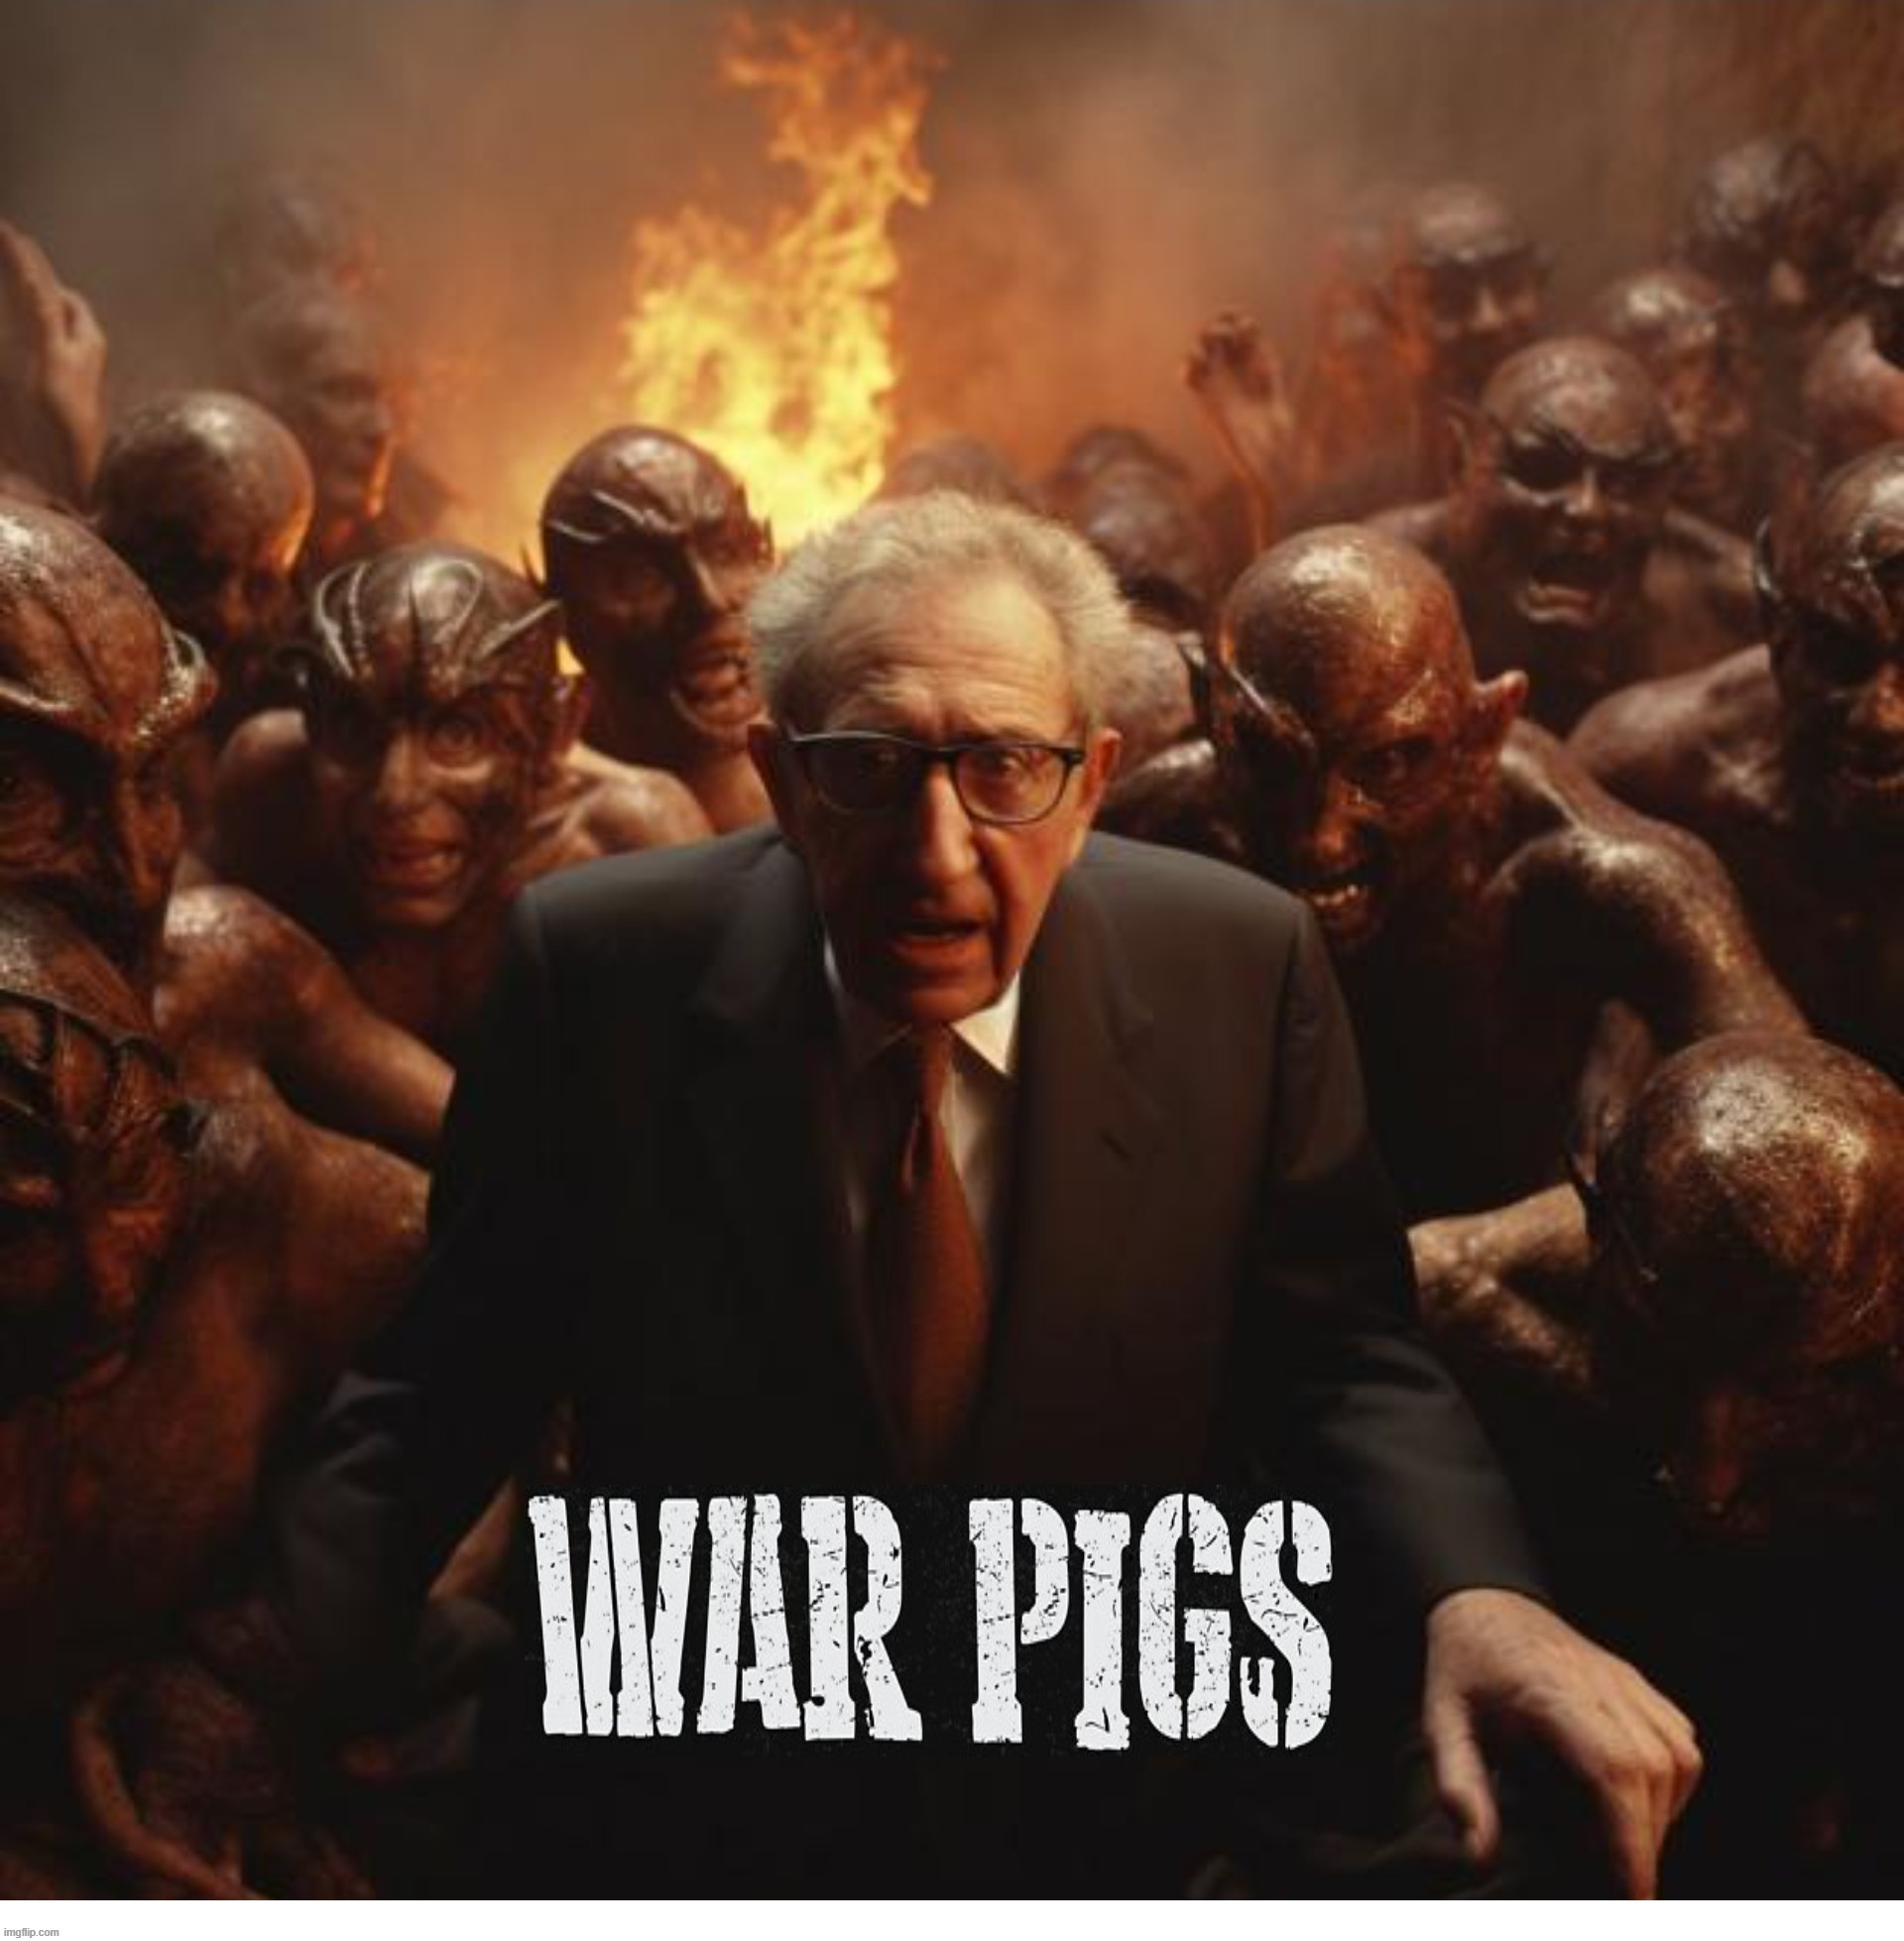 Henry Kissinger arrives in hell. | image tagged in henry kissinger,why am i in hell,what the hell happened here,war pigs,the boiler room of hell,extra-hell | made w/ Imgflip meme maker